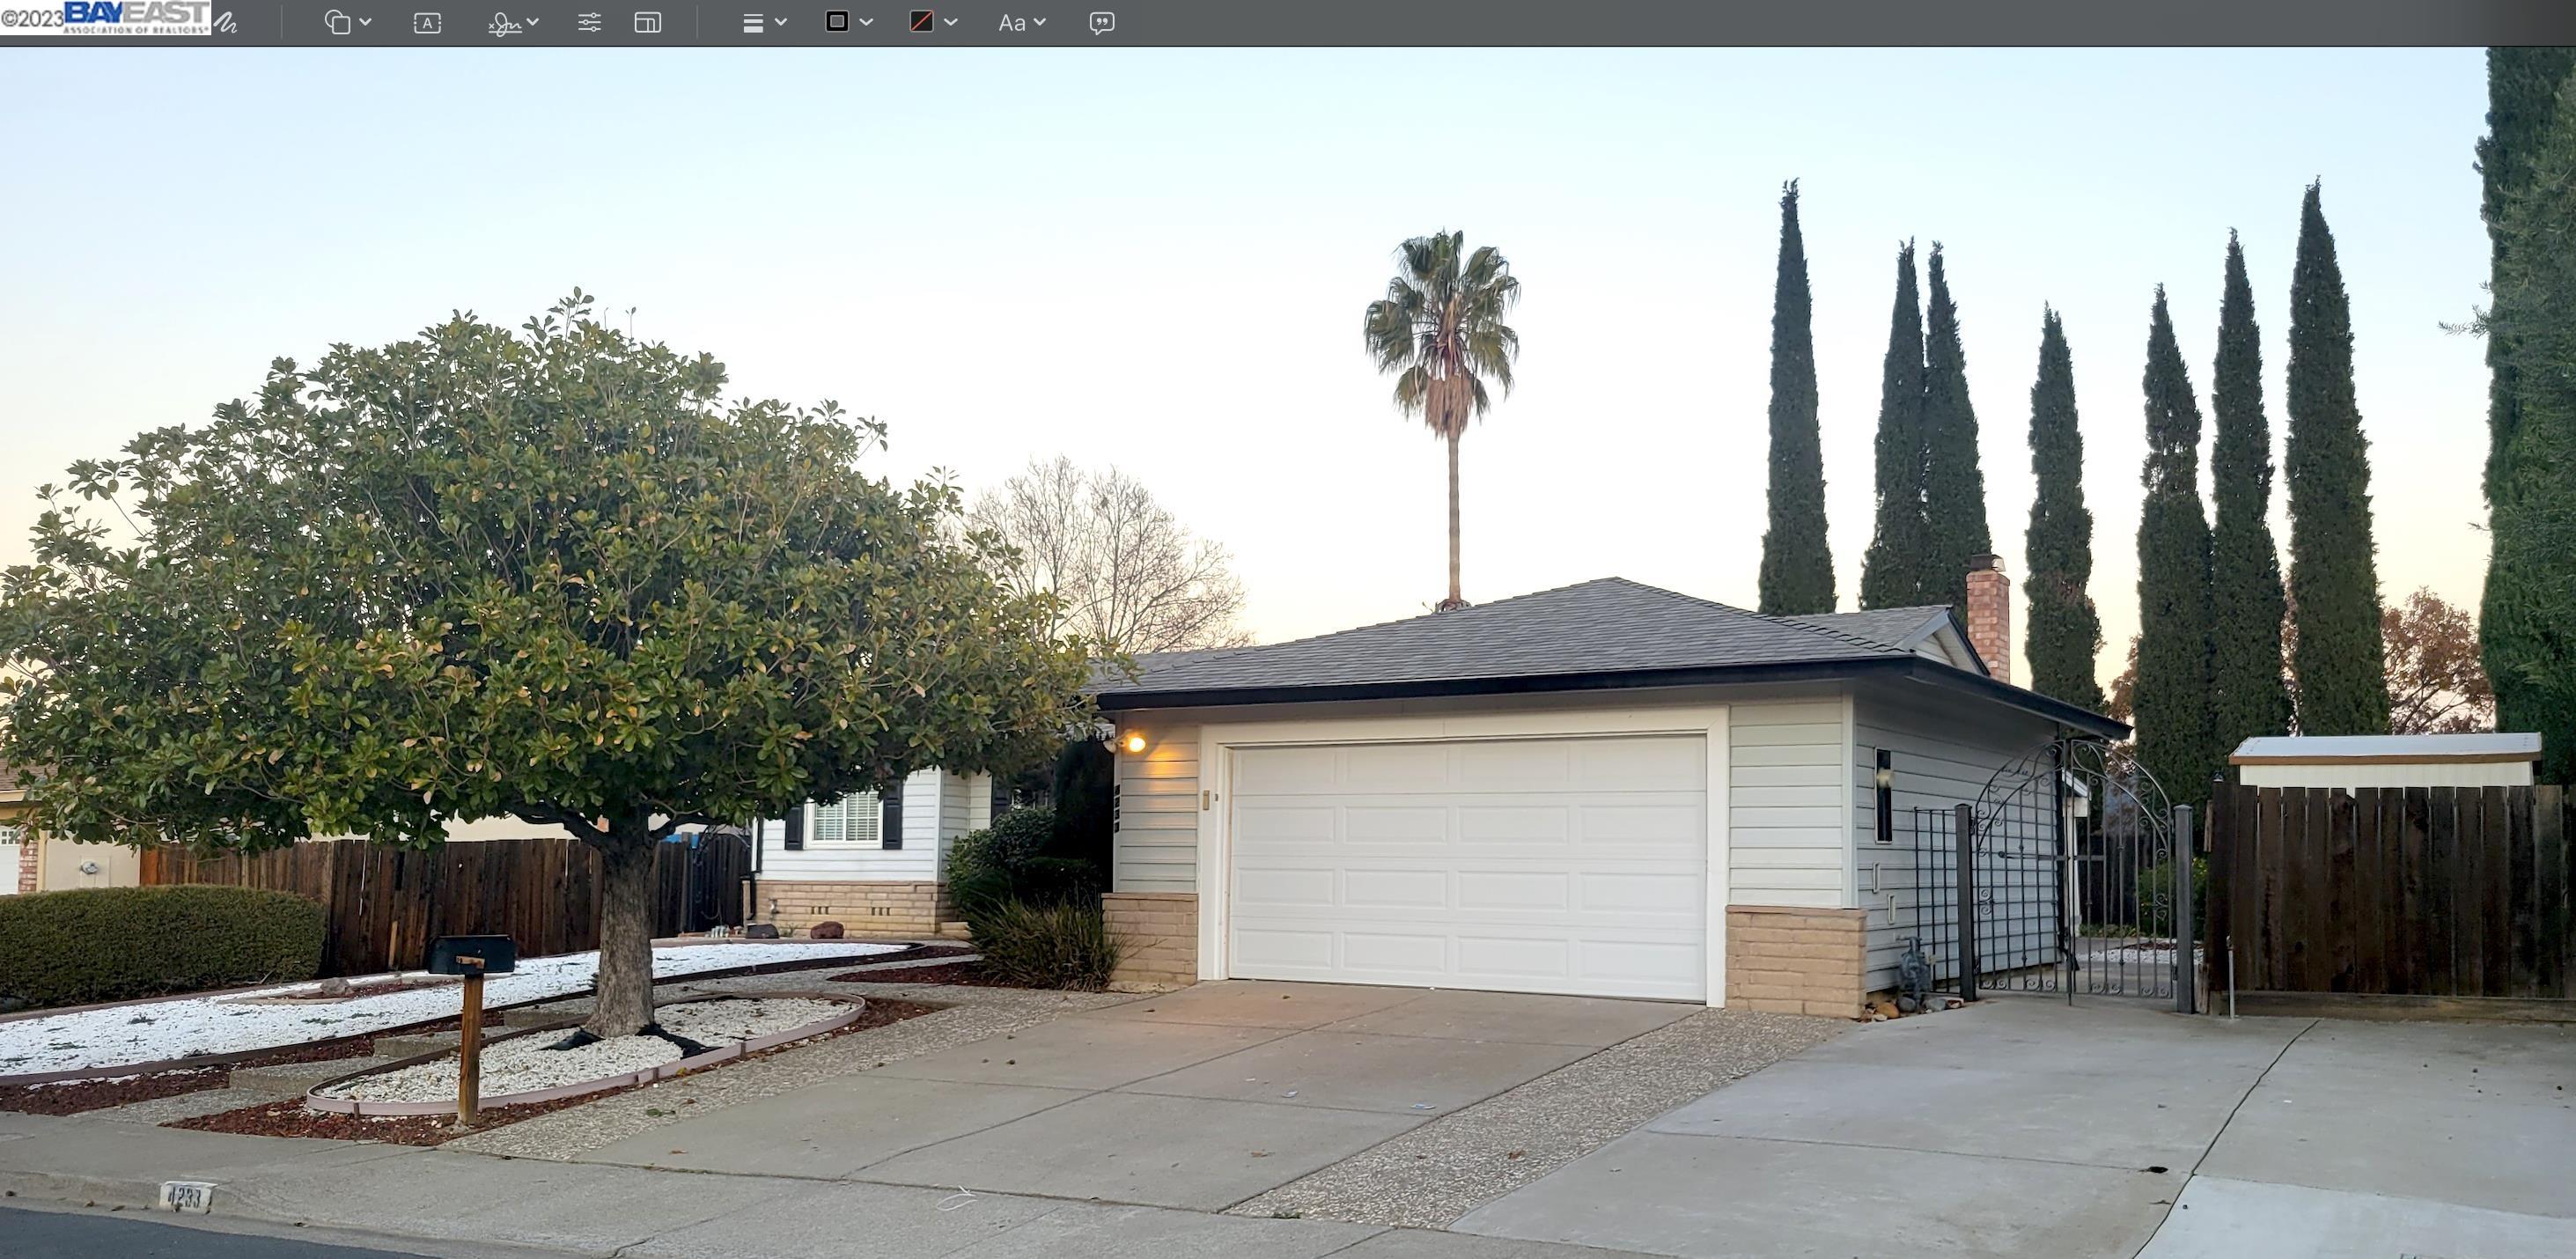 4233 Suzanne Dr, Pittsburg, CA 94565